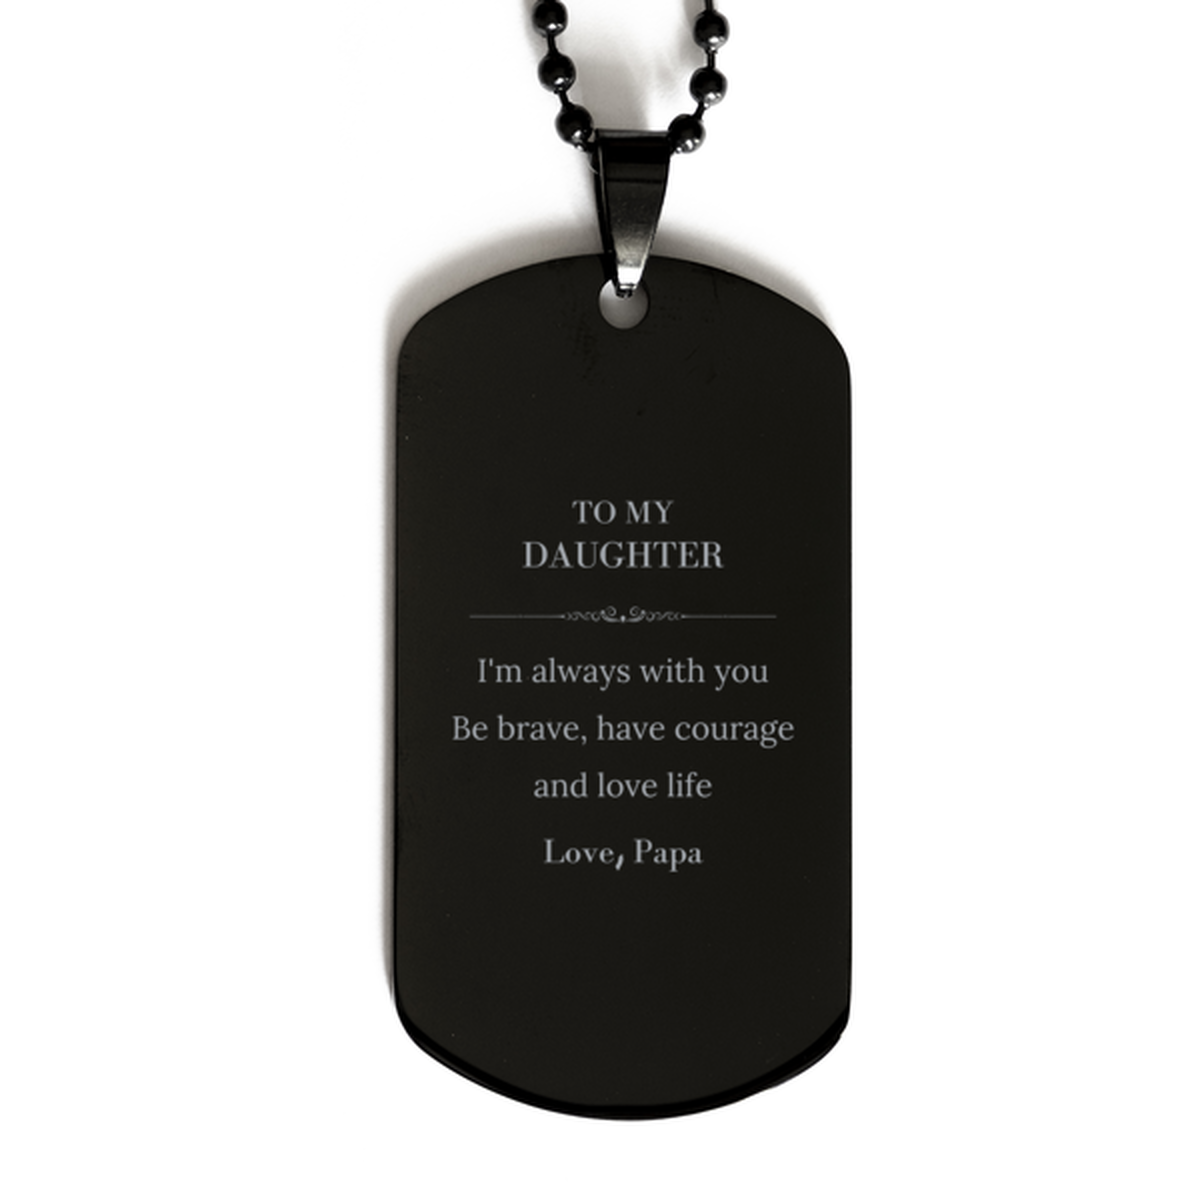 To My Daughter Gifts from Papa, Unique Black Dog Tag Inspirational Christmas Birthday Graduation Gifts for Daughter I'm always with you. Be brave, have courage and love life. Love, Papa